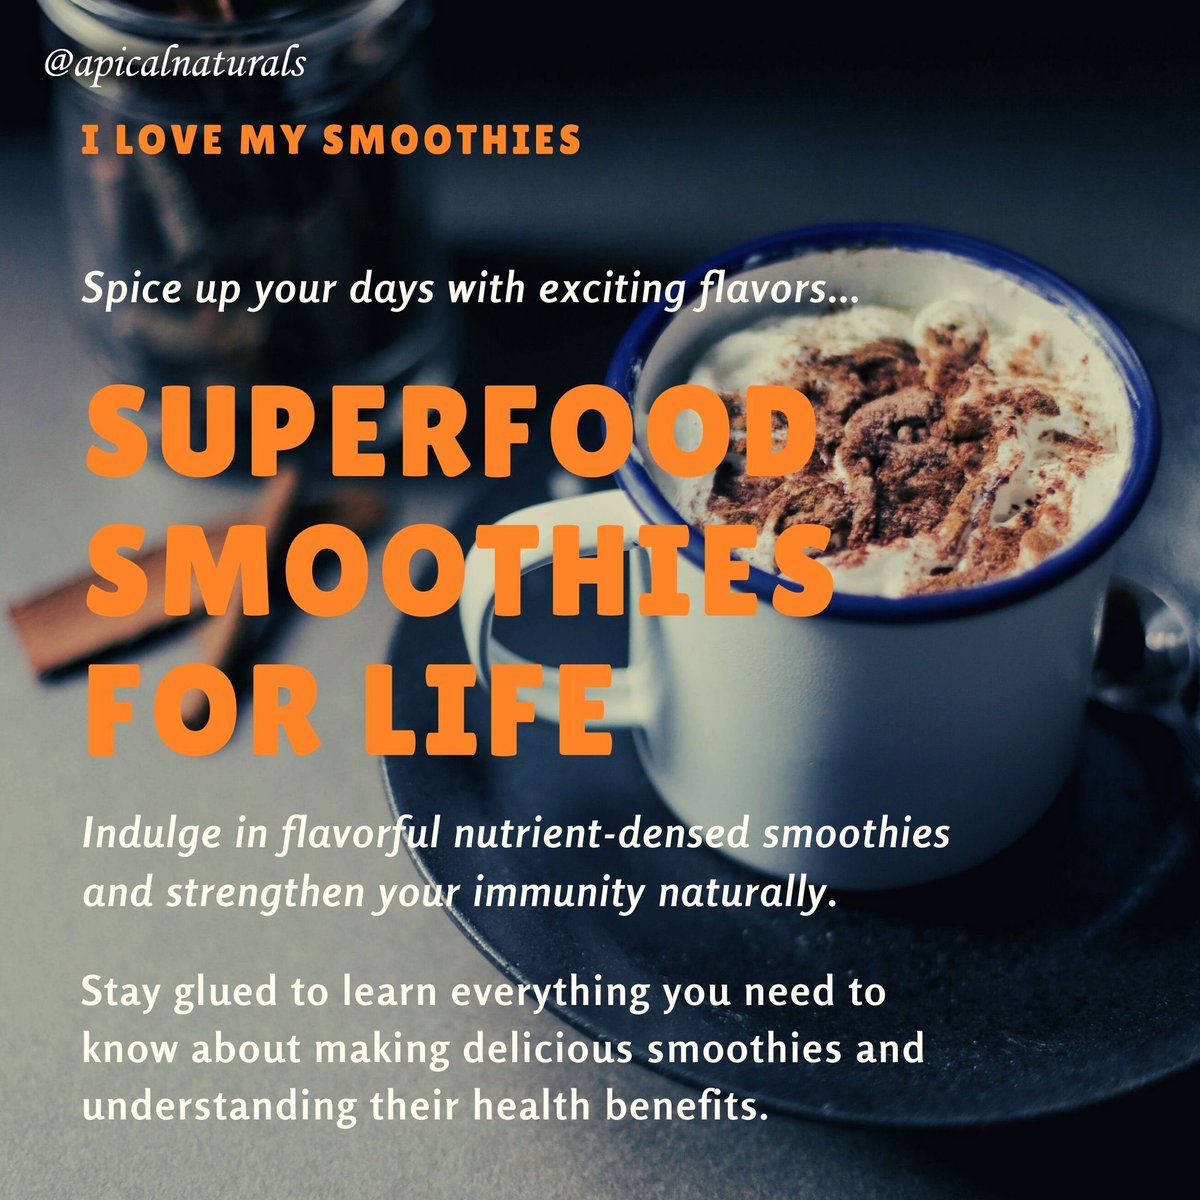 Take smoothies...stay healthy.
                                                                                   
#apicalnaturals #apicalhealthyrecommendations #healthyrecommendations #healthyrecipes #smoothies #healthysmoothies #healthymealsprep #holistic #holistichealth